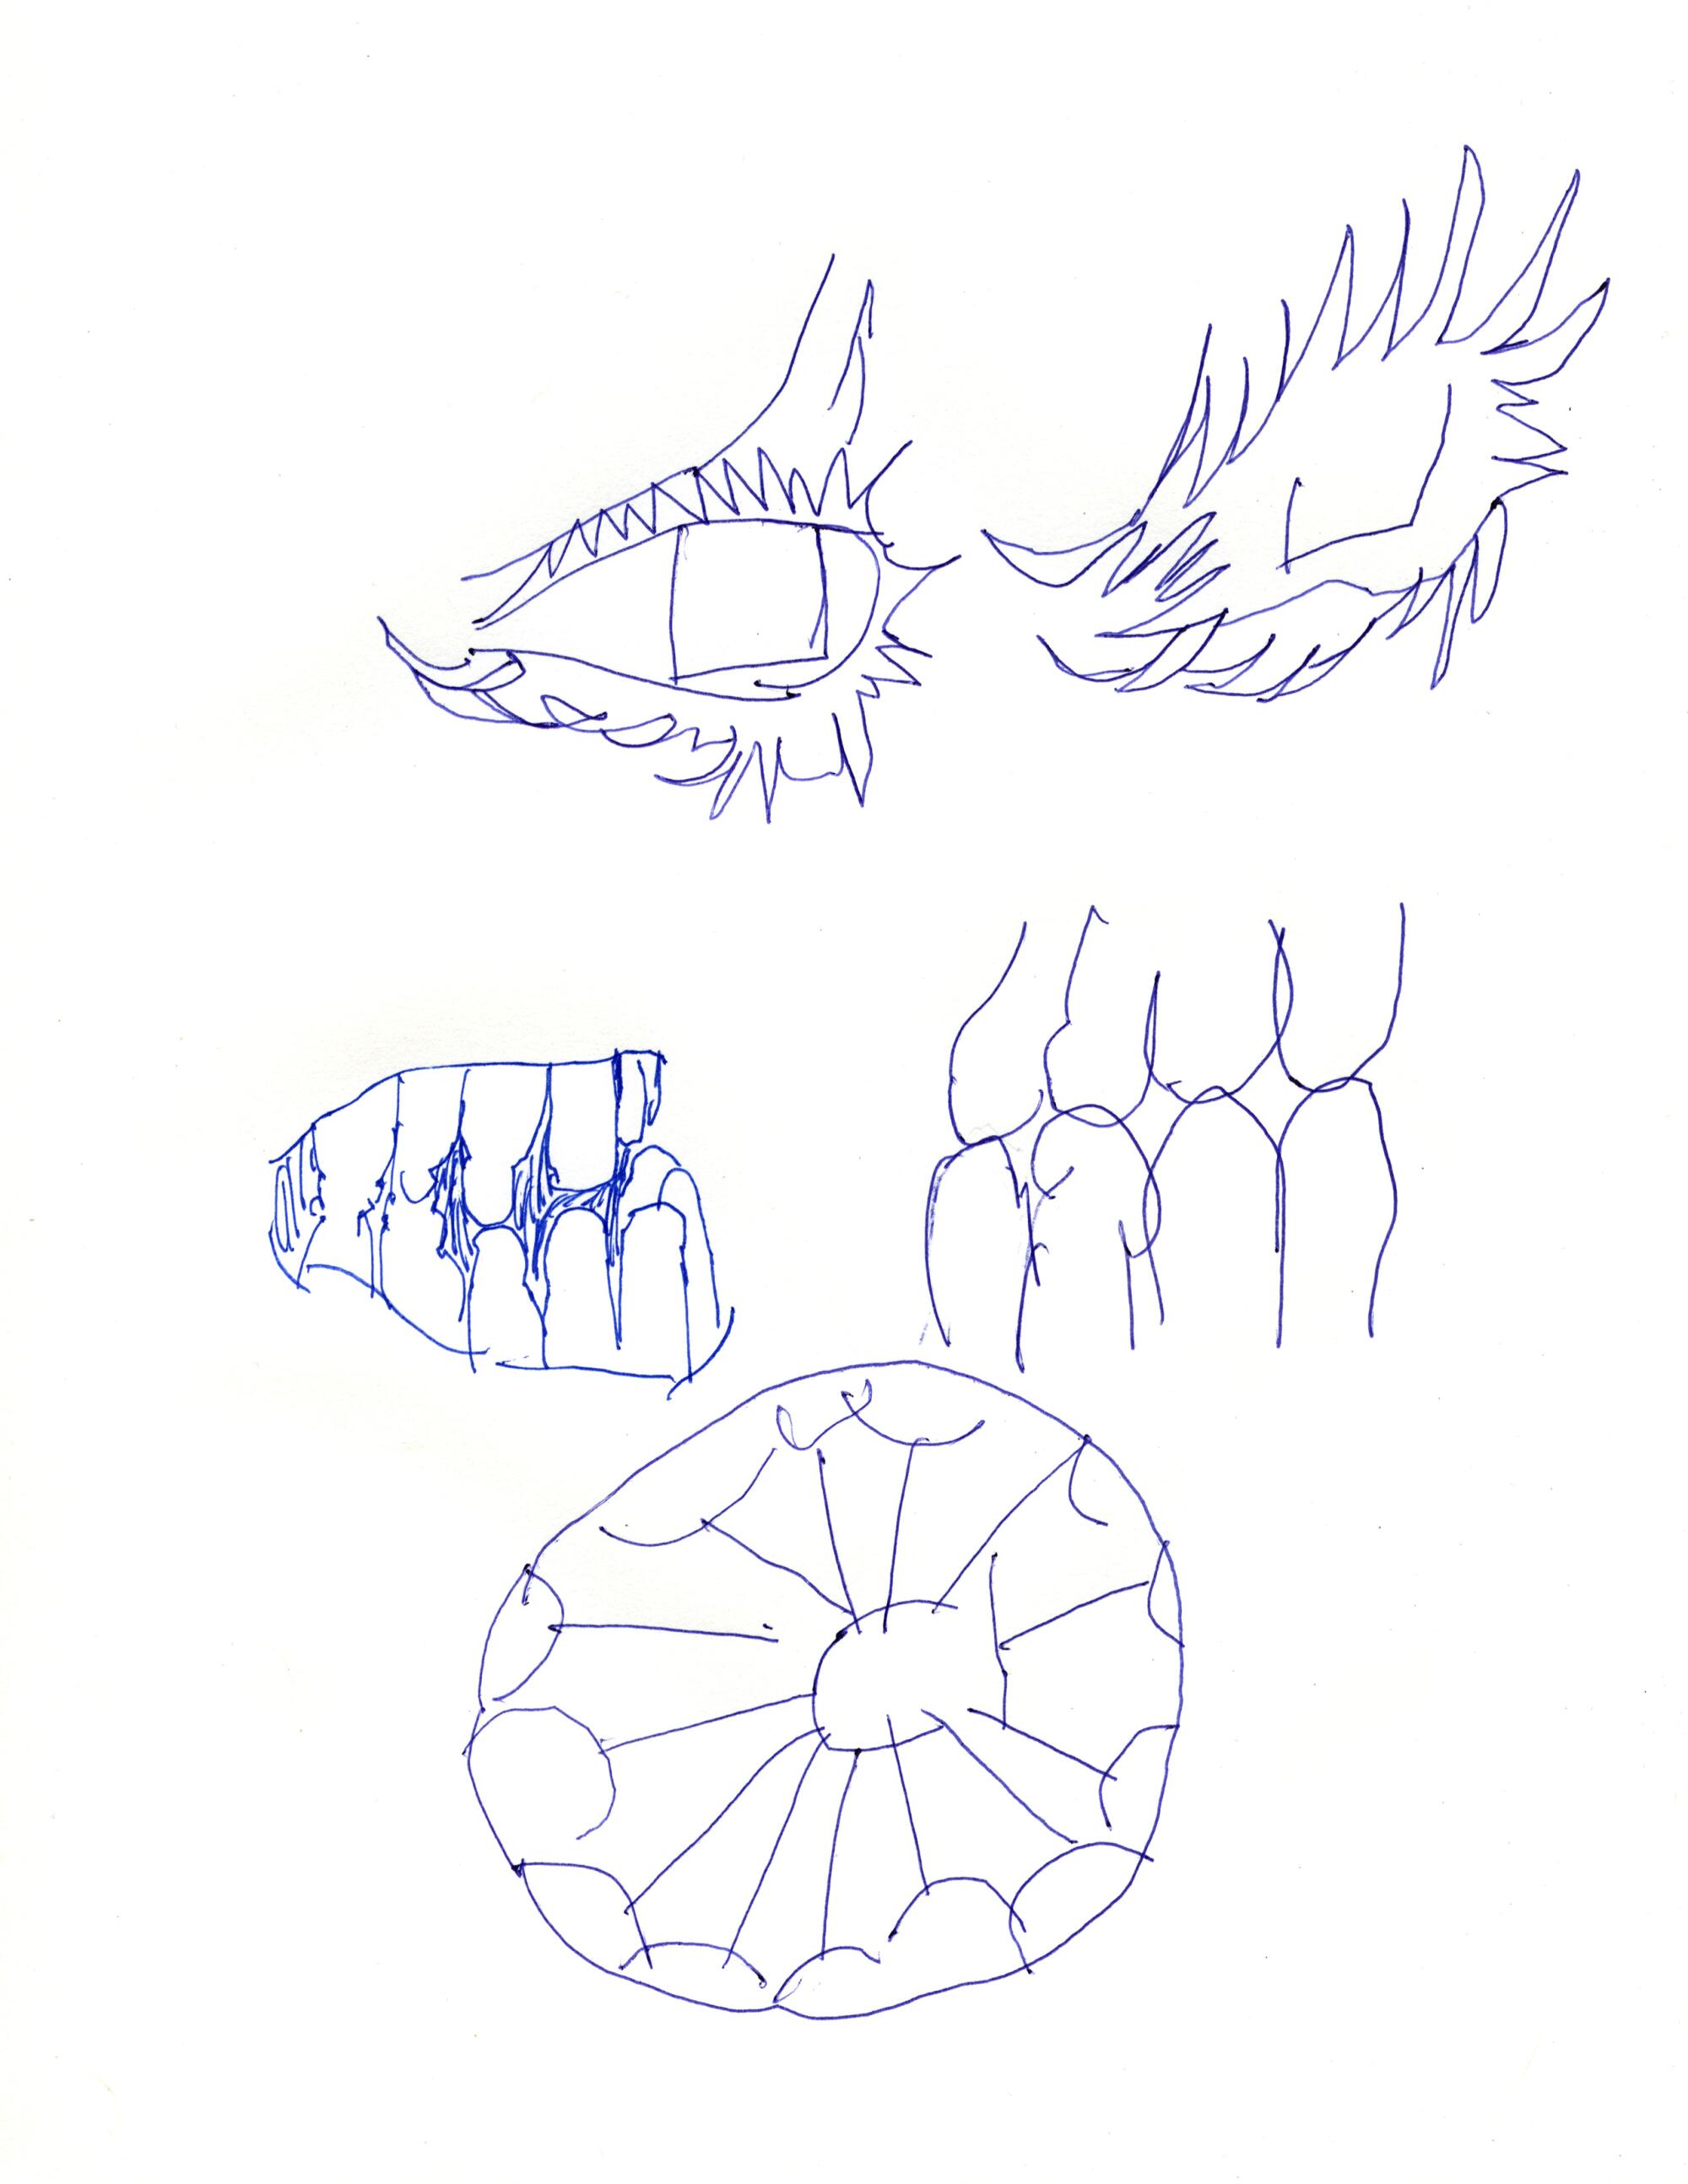 A drawing of two eyeballs and two sets of teeth.